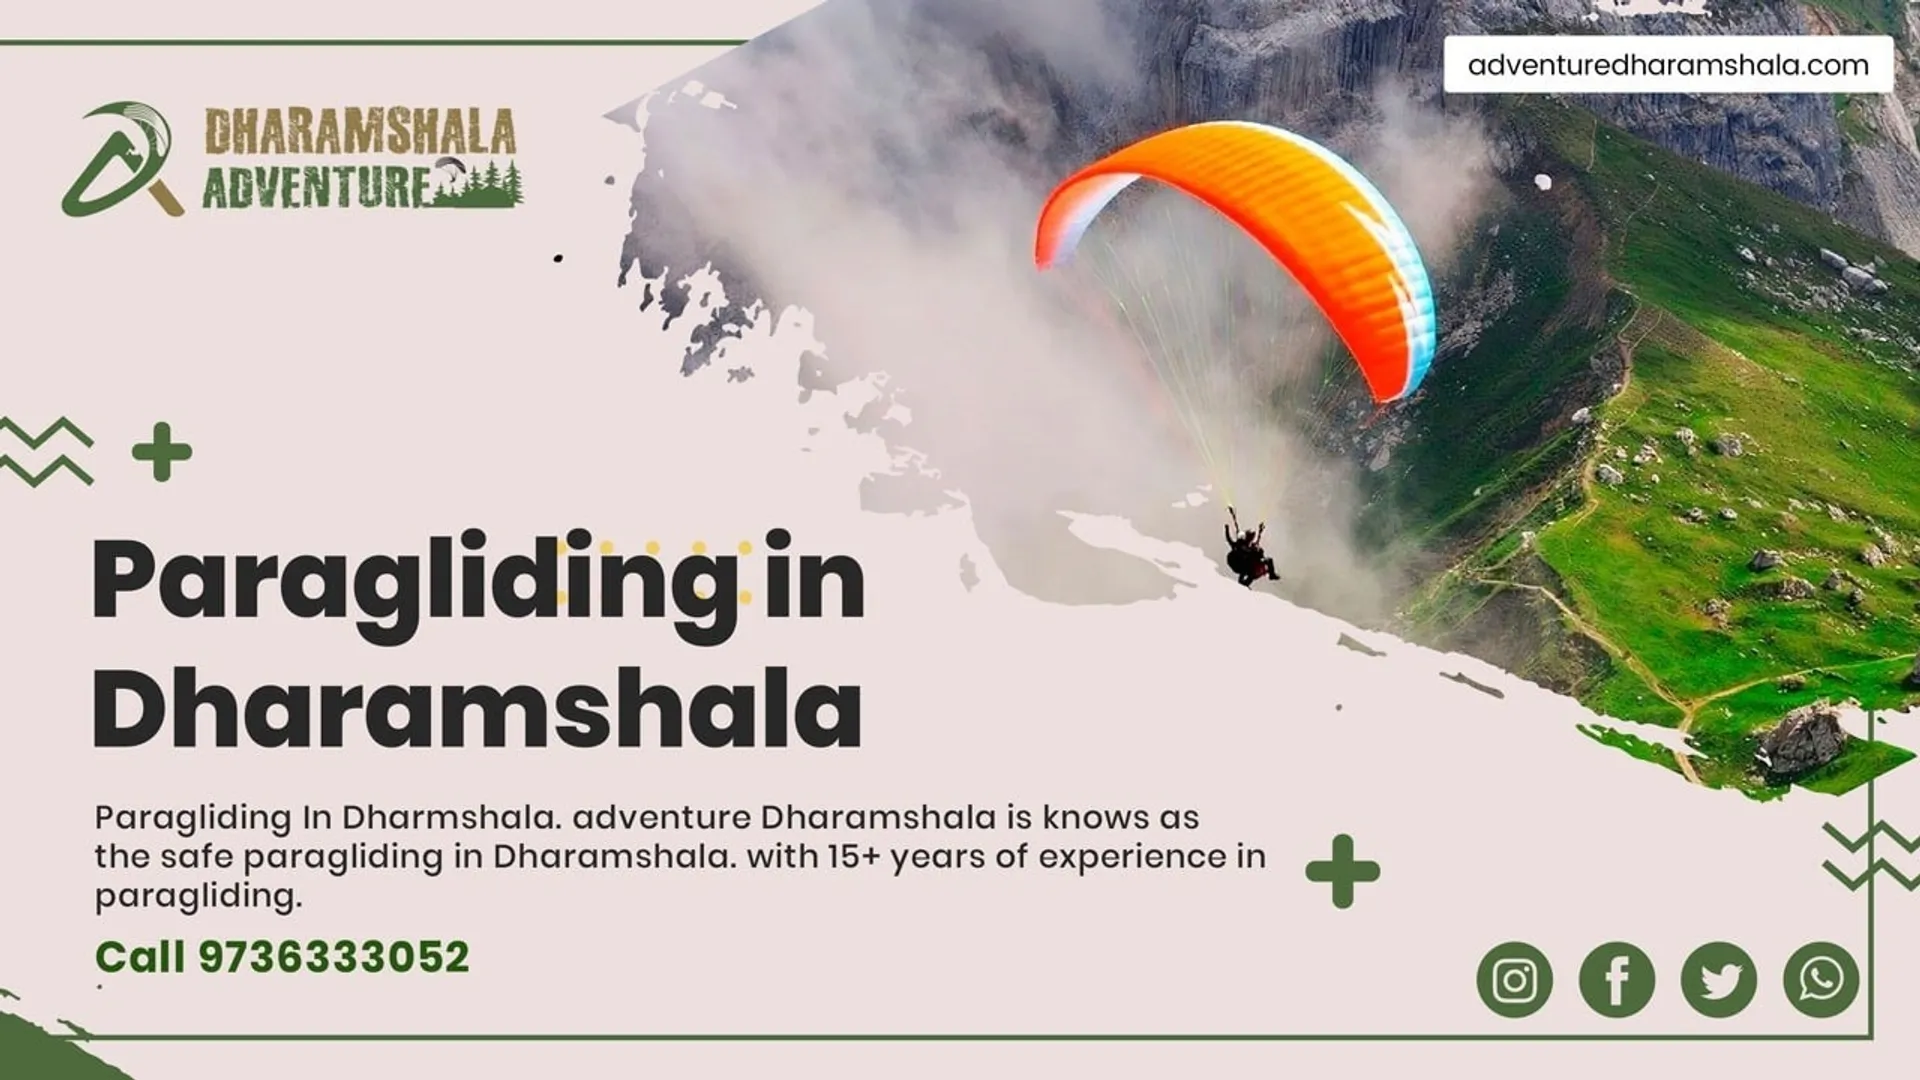 Embrace the exhilarating experience of paragliding in Dharamshala with Adventure Dharamshala. As the premier adventure provider in the region, we offer an unforgettable paragliding adventure that will leave you breathless.

Contact us now. https://g.co/kgs/SrC4d9